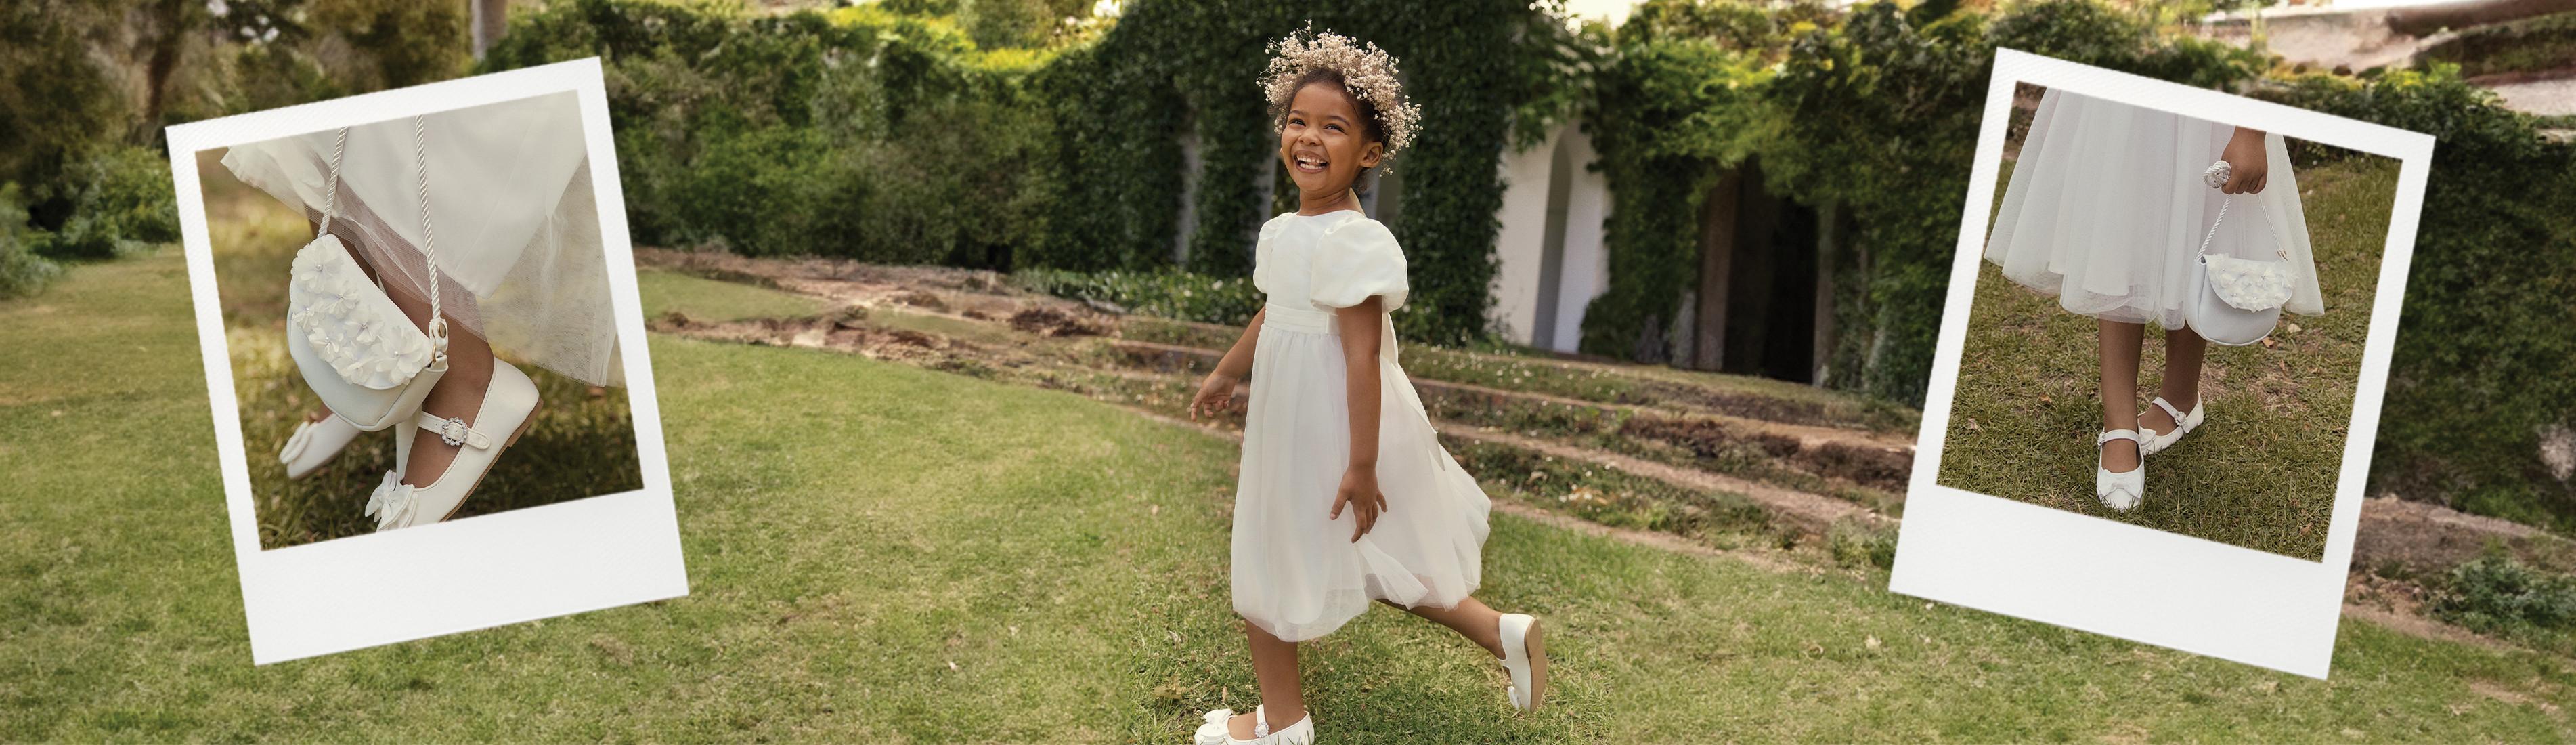 Child wearing a white dress with white shoes